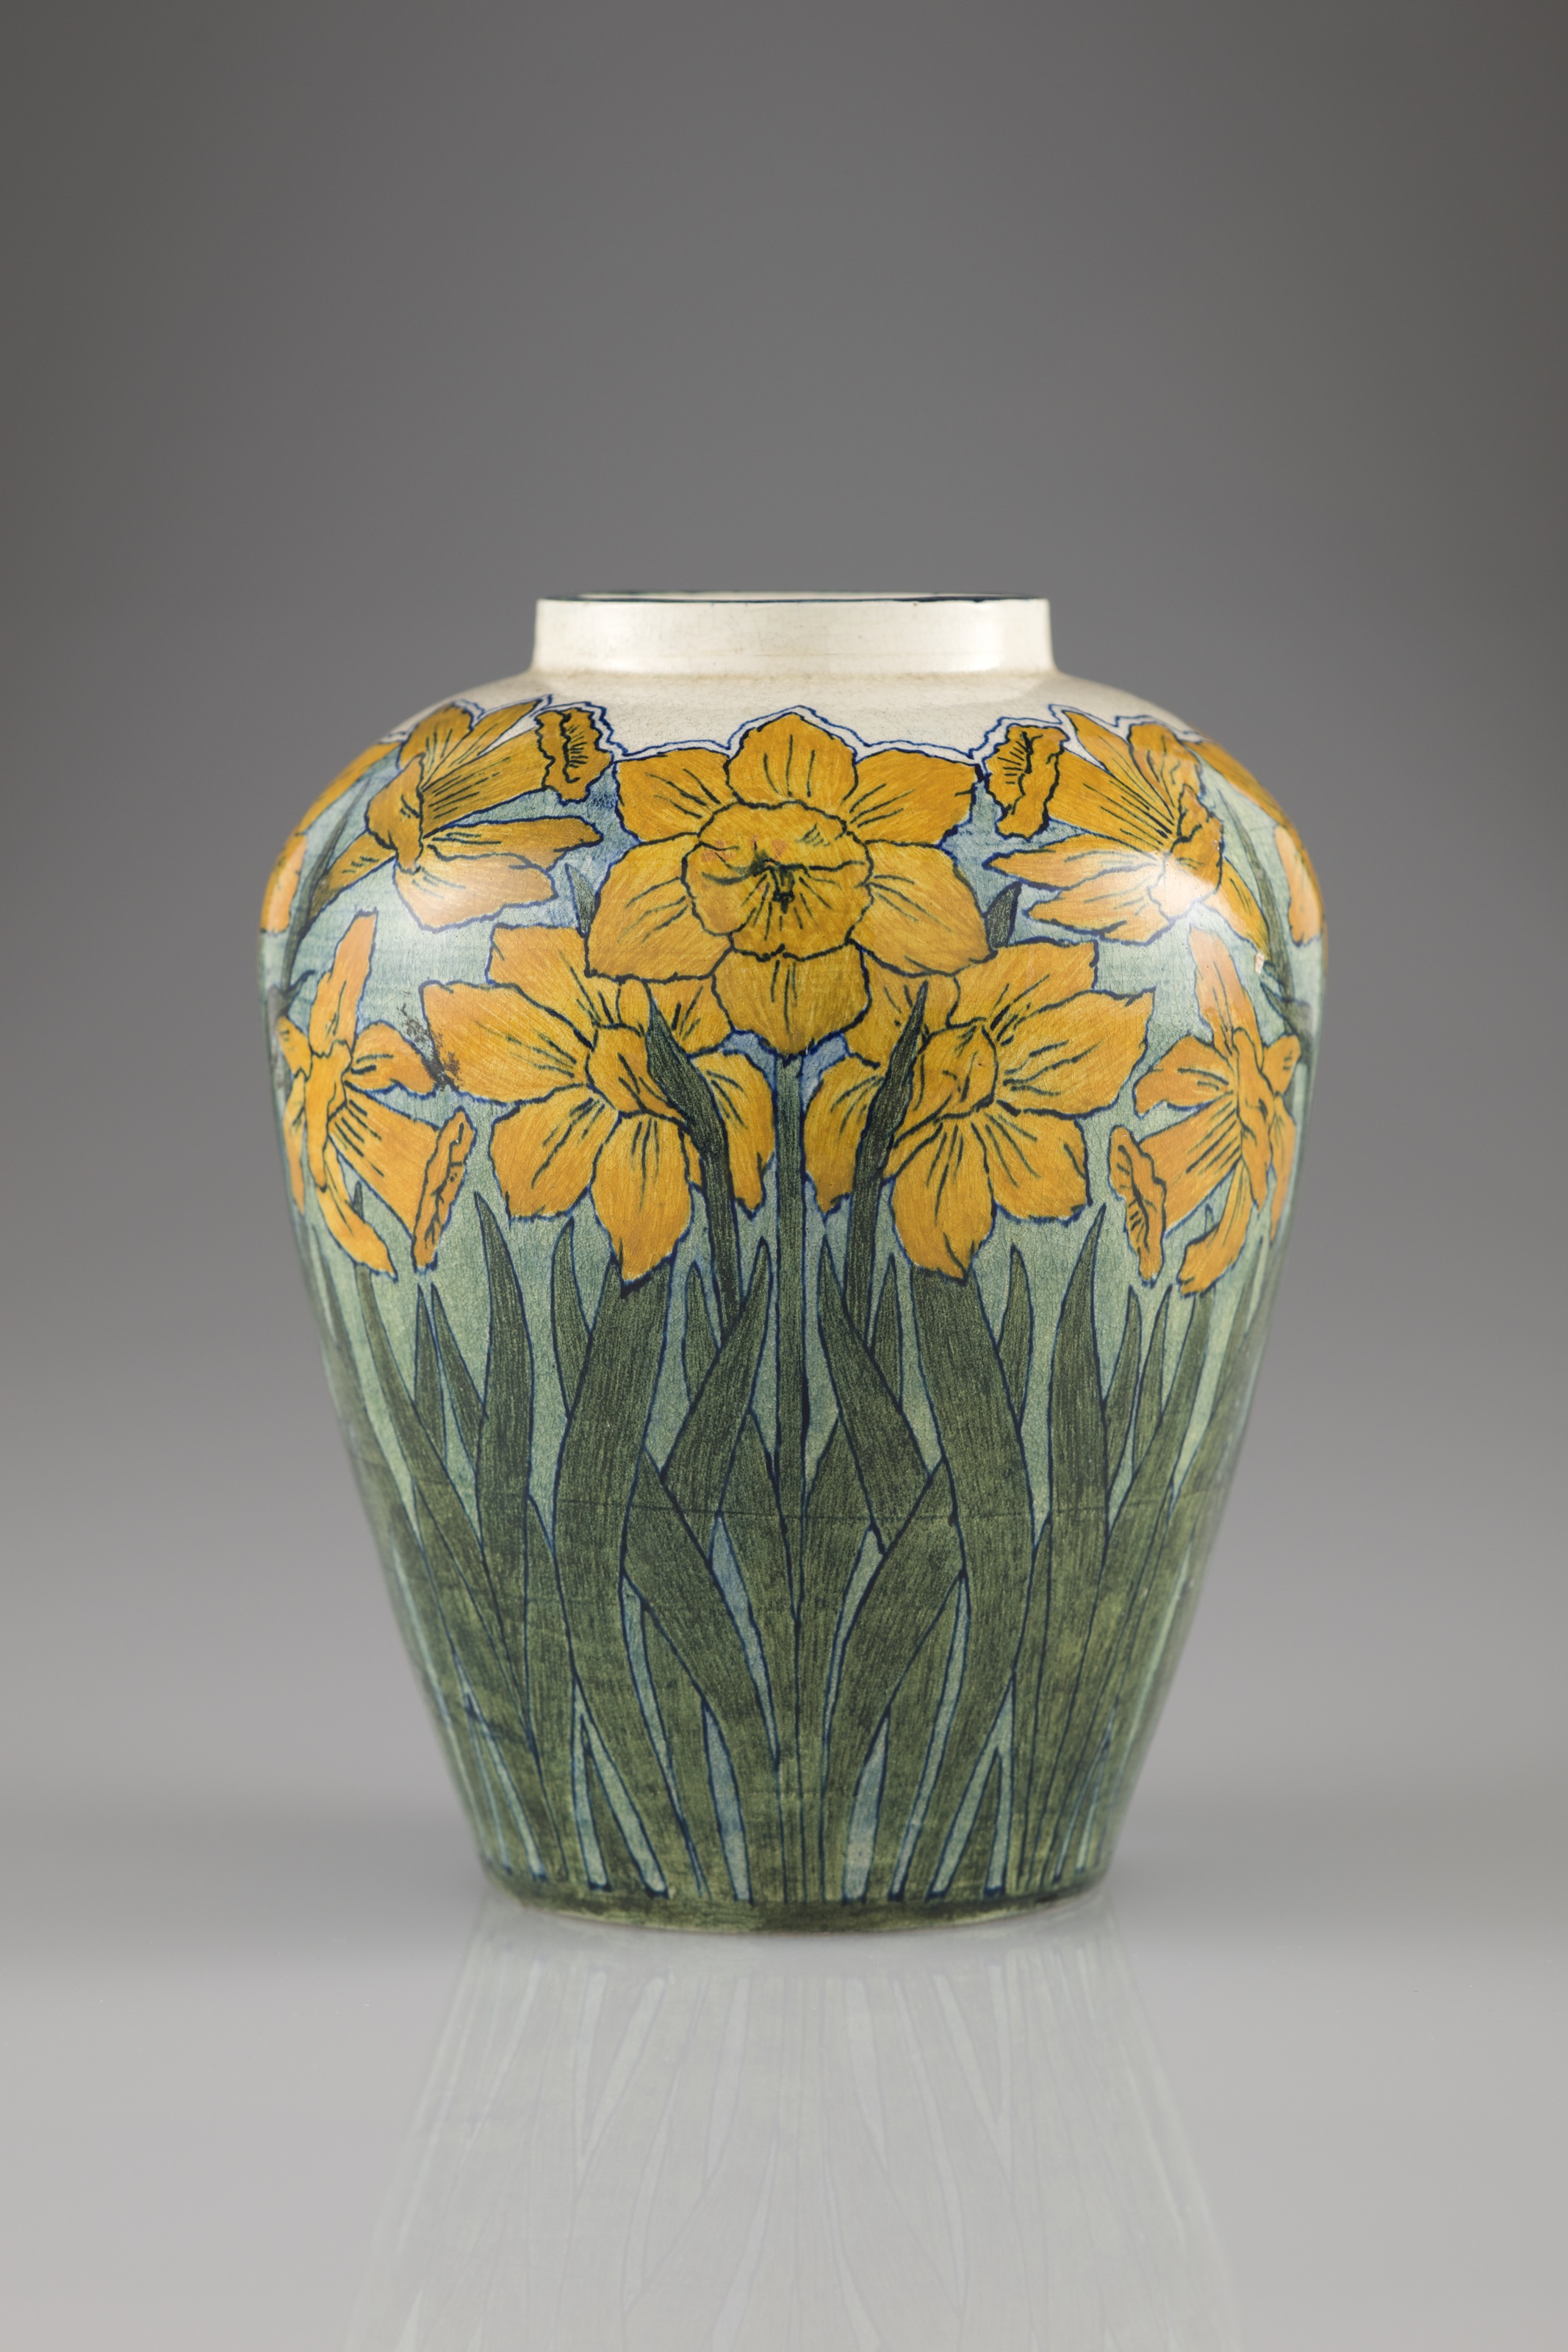 Newcomb Pottery: Vase | Smithsonian Institution